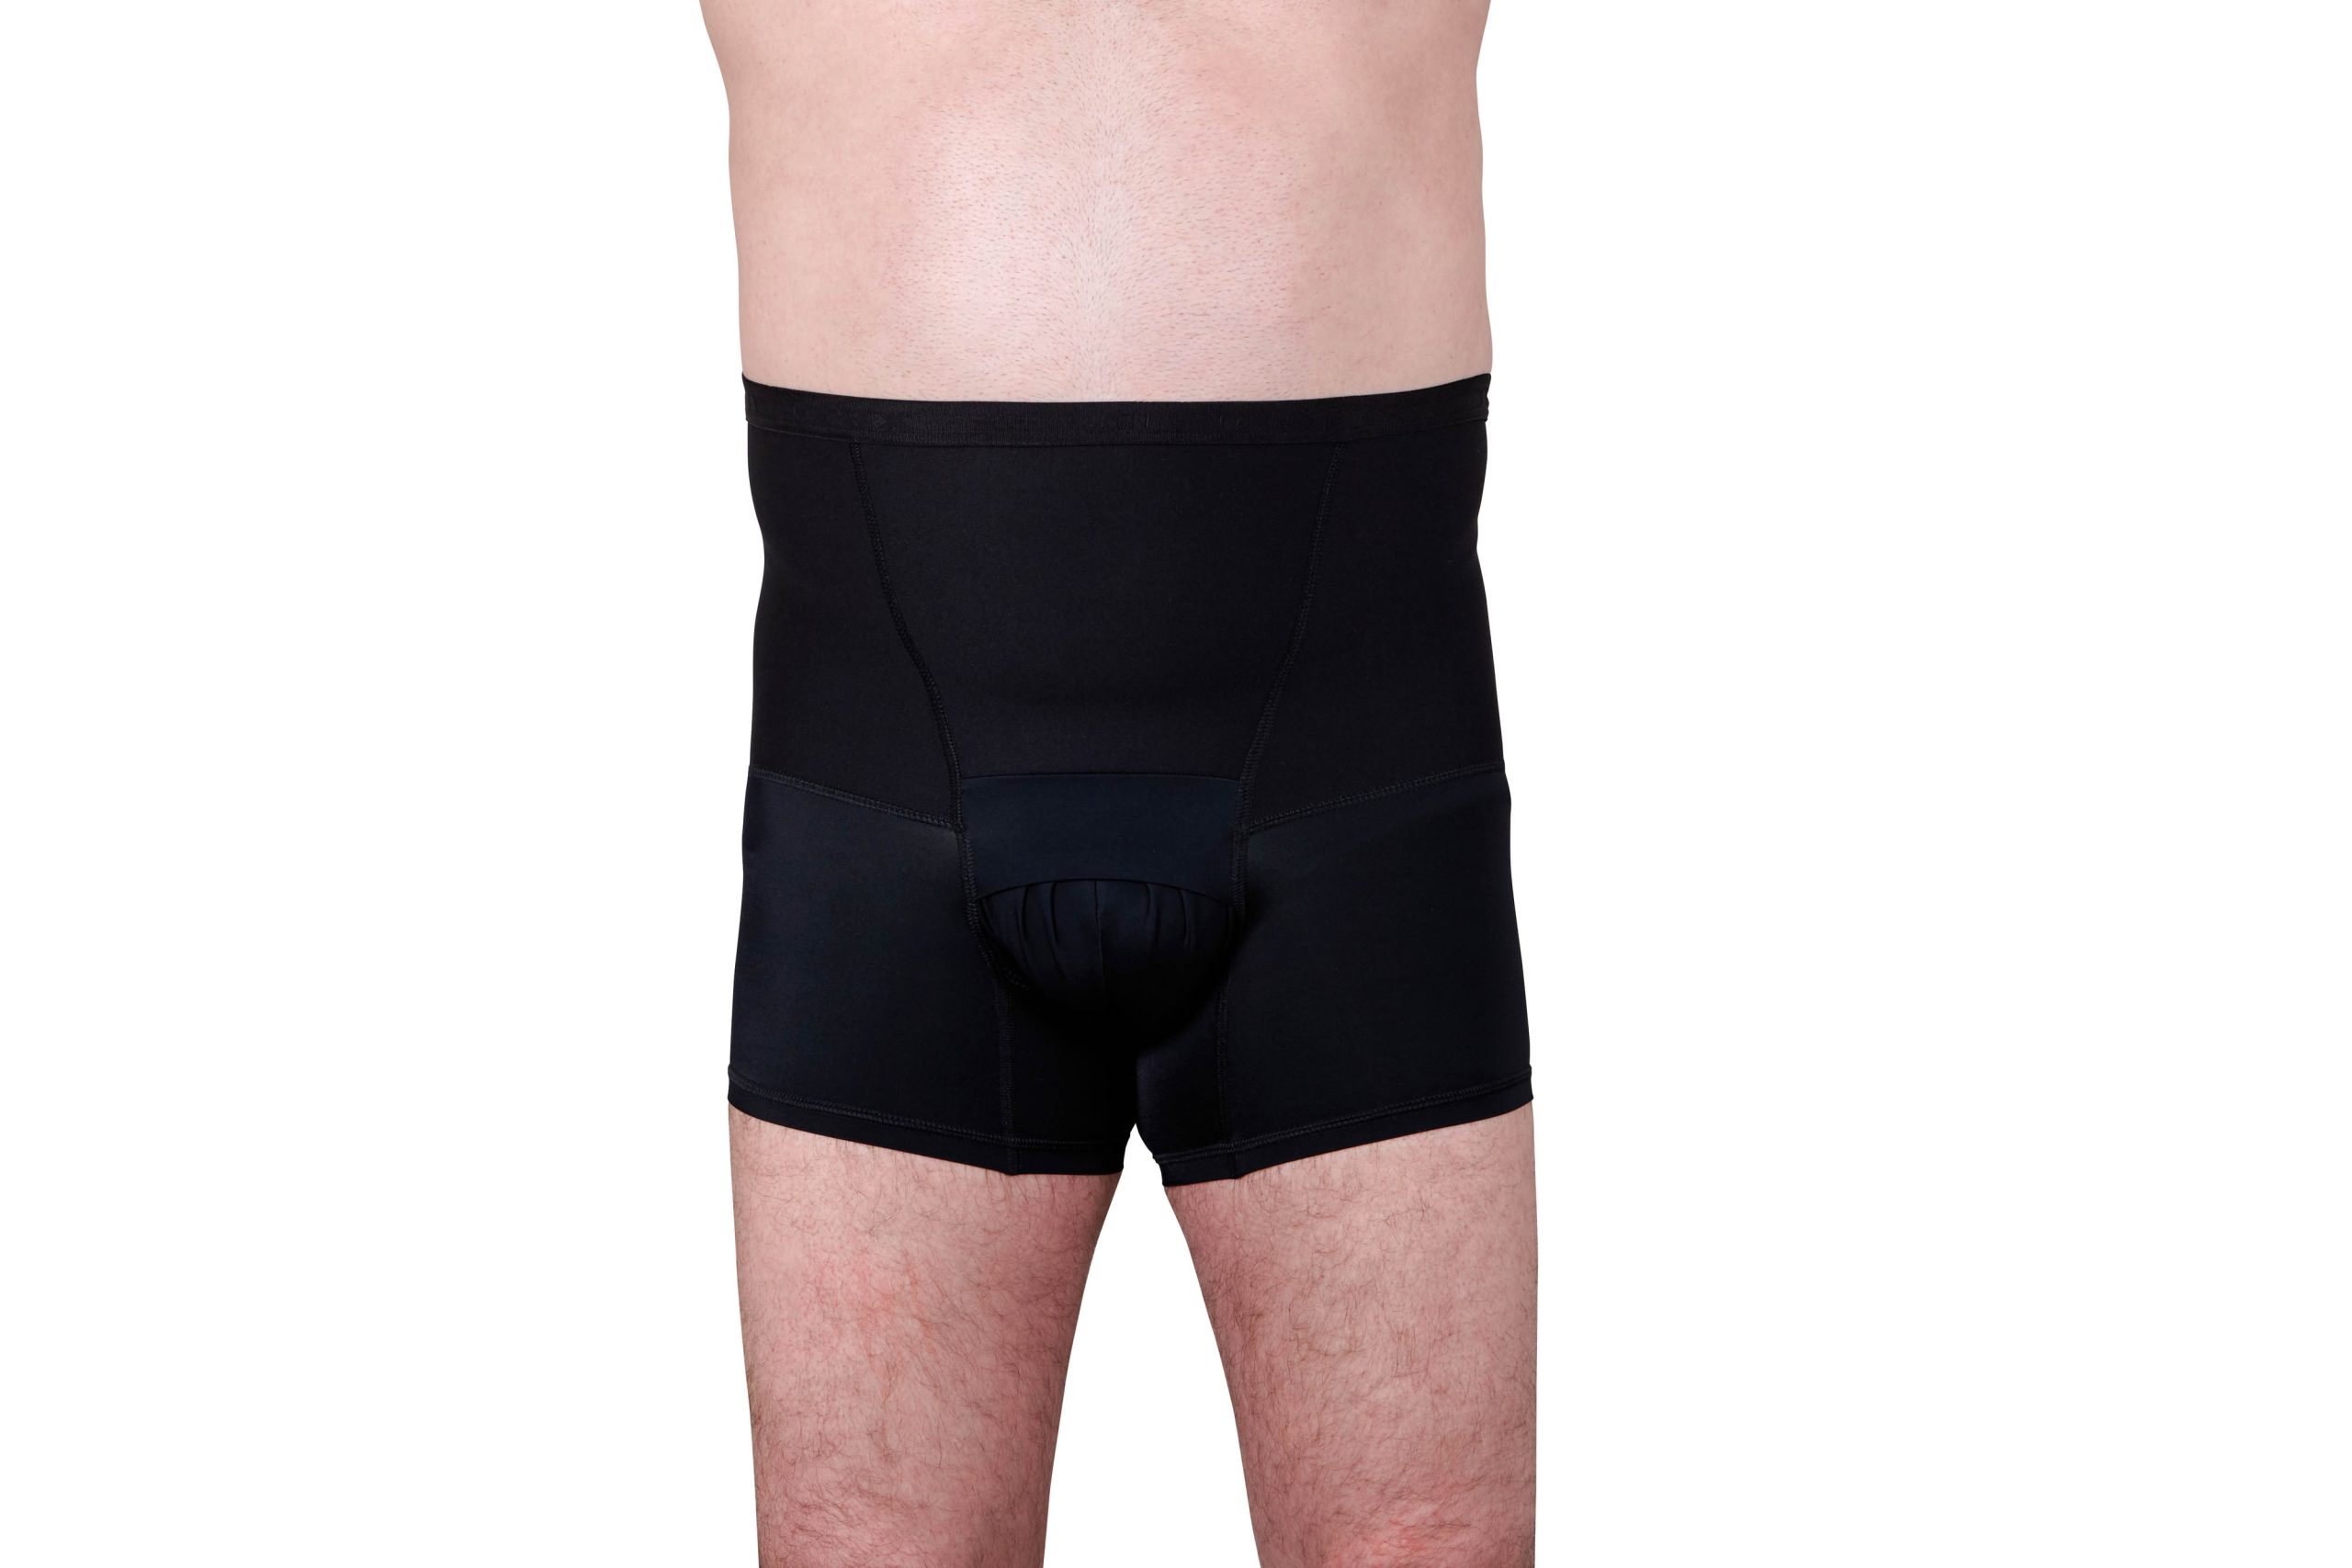 SUPORTX Hernia Support Girdles - Sutherland Medical